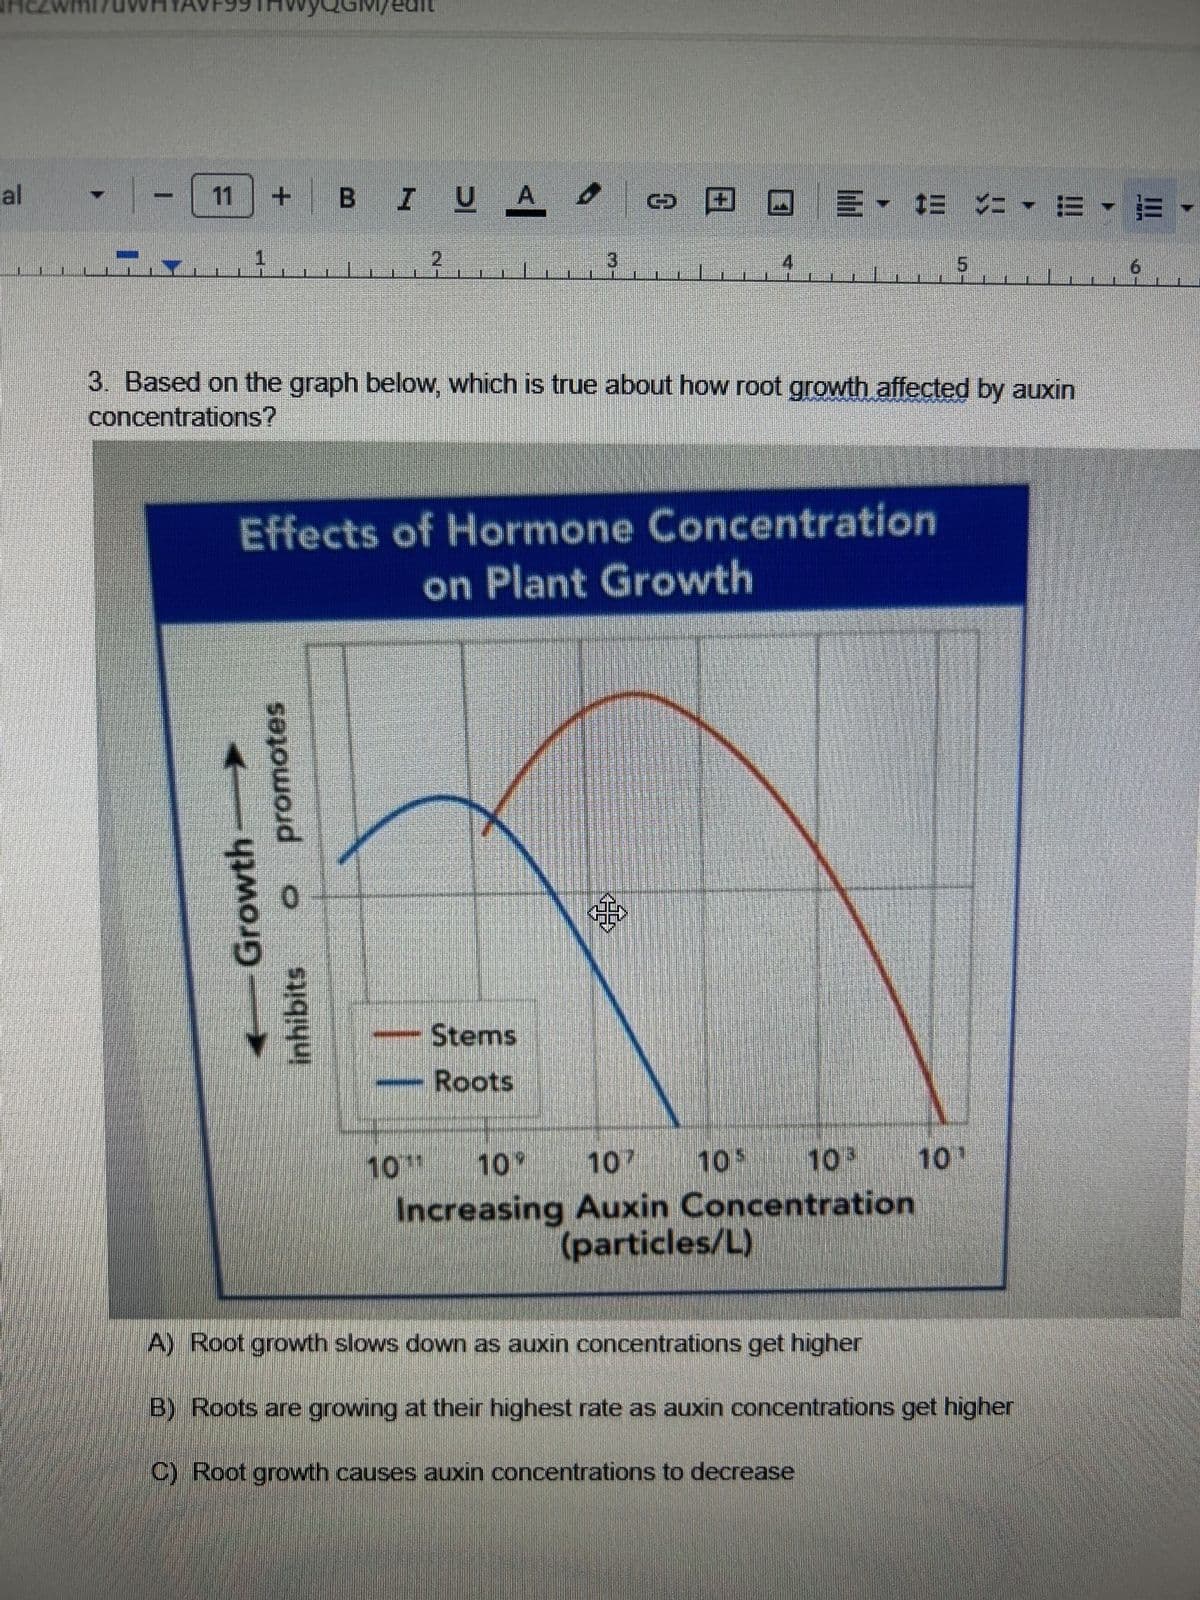 ial
- 11
+ BIUA✔ » @ @ =• * *-B-3-
Growth
yQGM/edit
promotes
3. Based on the graph below, which is true about how root growth affected by auxin
concentrations?
O
2
Effects of Hormone Concentration
on Plant Growth
inhibits
3
Stems
Roots
4
38
10¹¹ 10% 107 105 10³ 10¹
Increasing Auxin Concentration
(particles/L)
A) Root growth slows down as auxin concentrations get higher
B) Roots are growing at their highest rate as auxin concentrations get higher
C) Root growth causes auxin concentrations to decrease